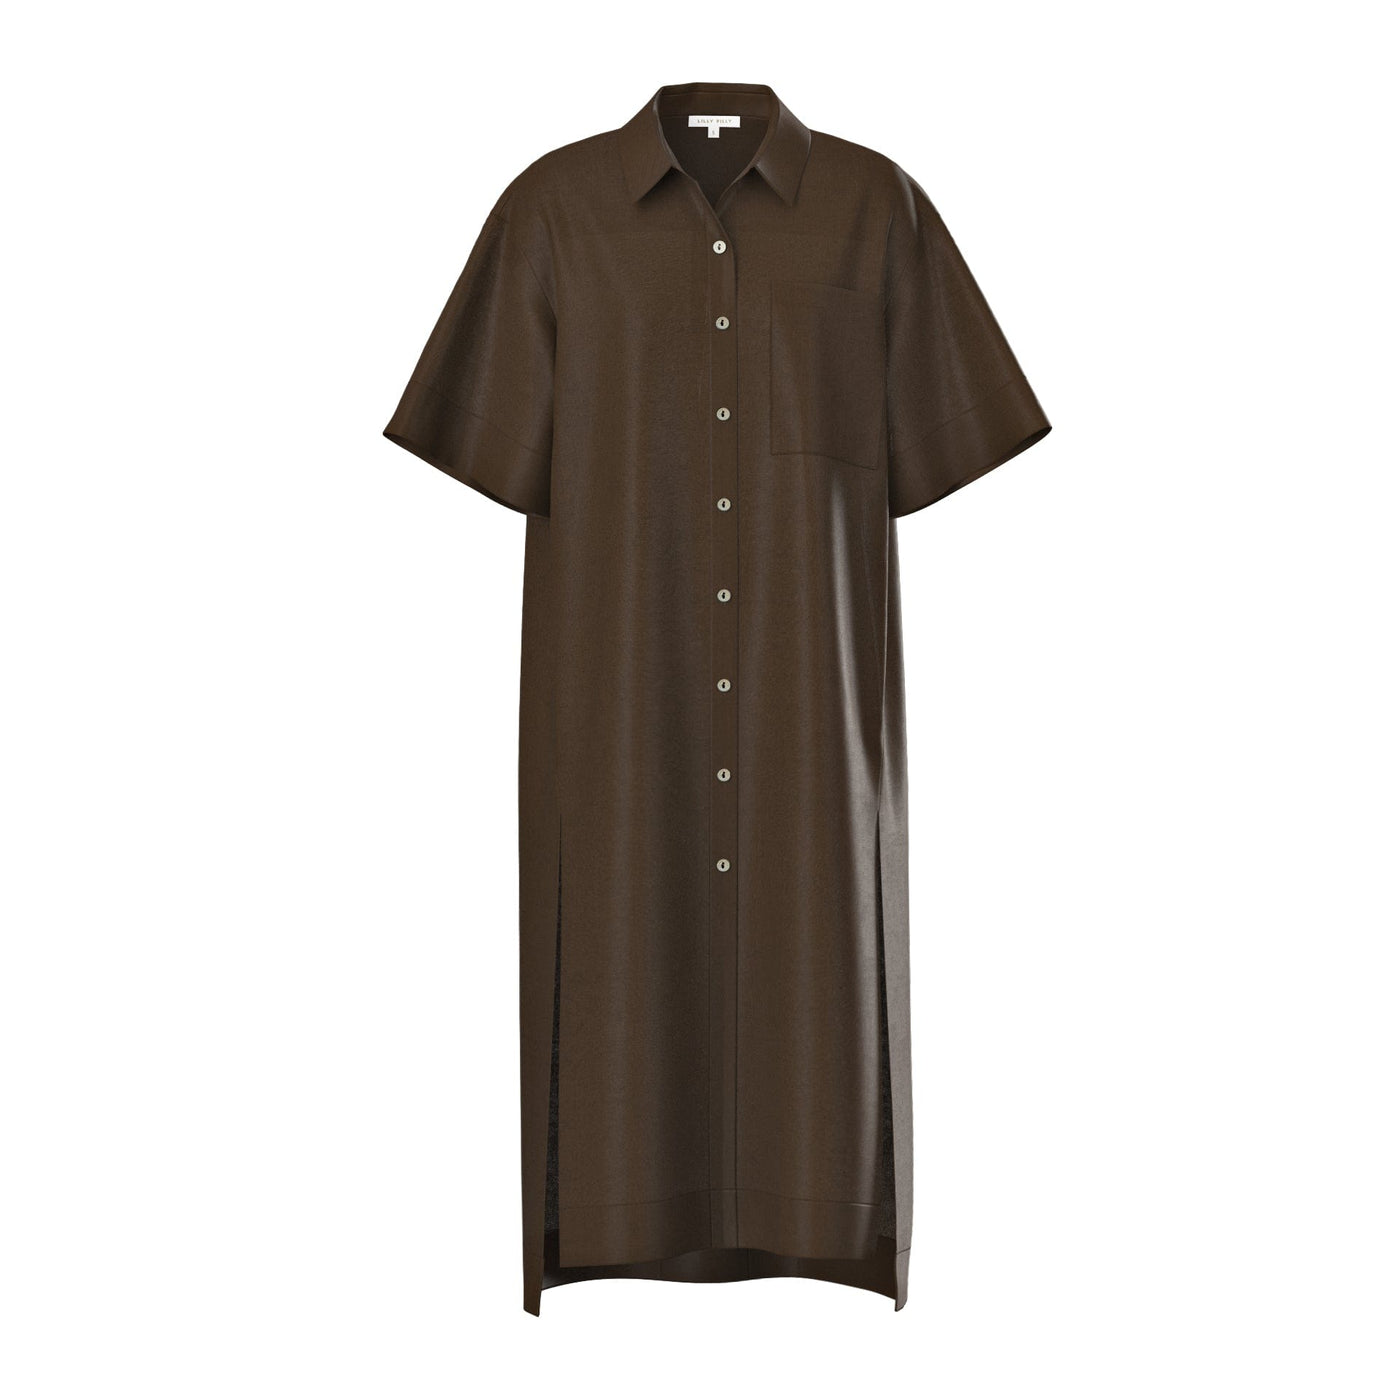 LILLY PILLY Collection Carly shirt made from 100% Organic linen in Chocolate, as 3D model showing front view